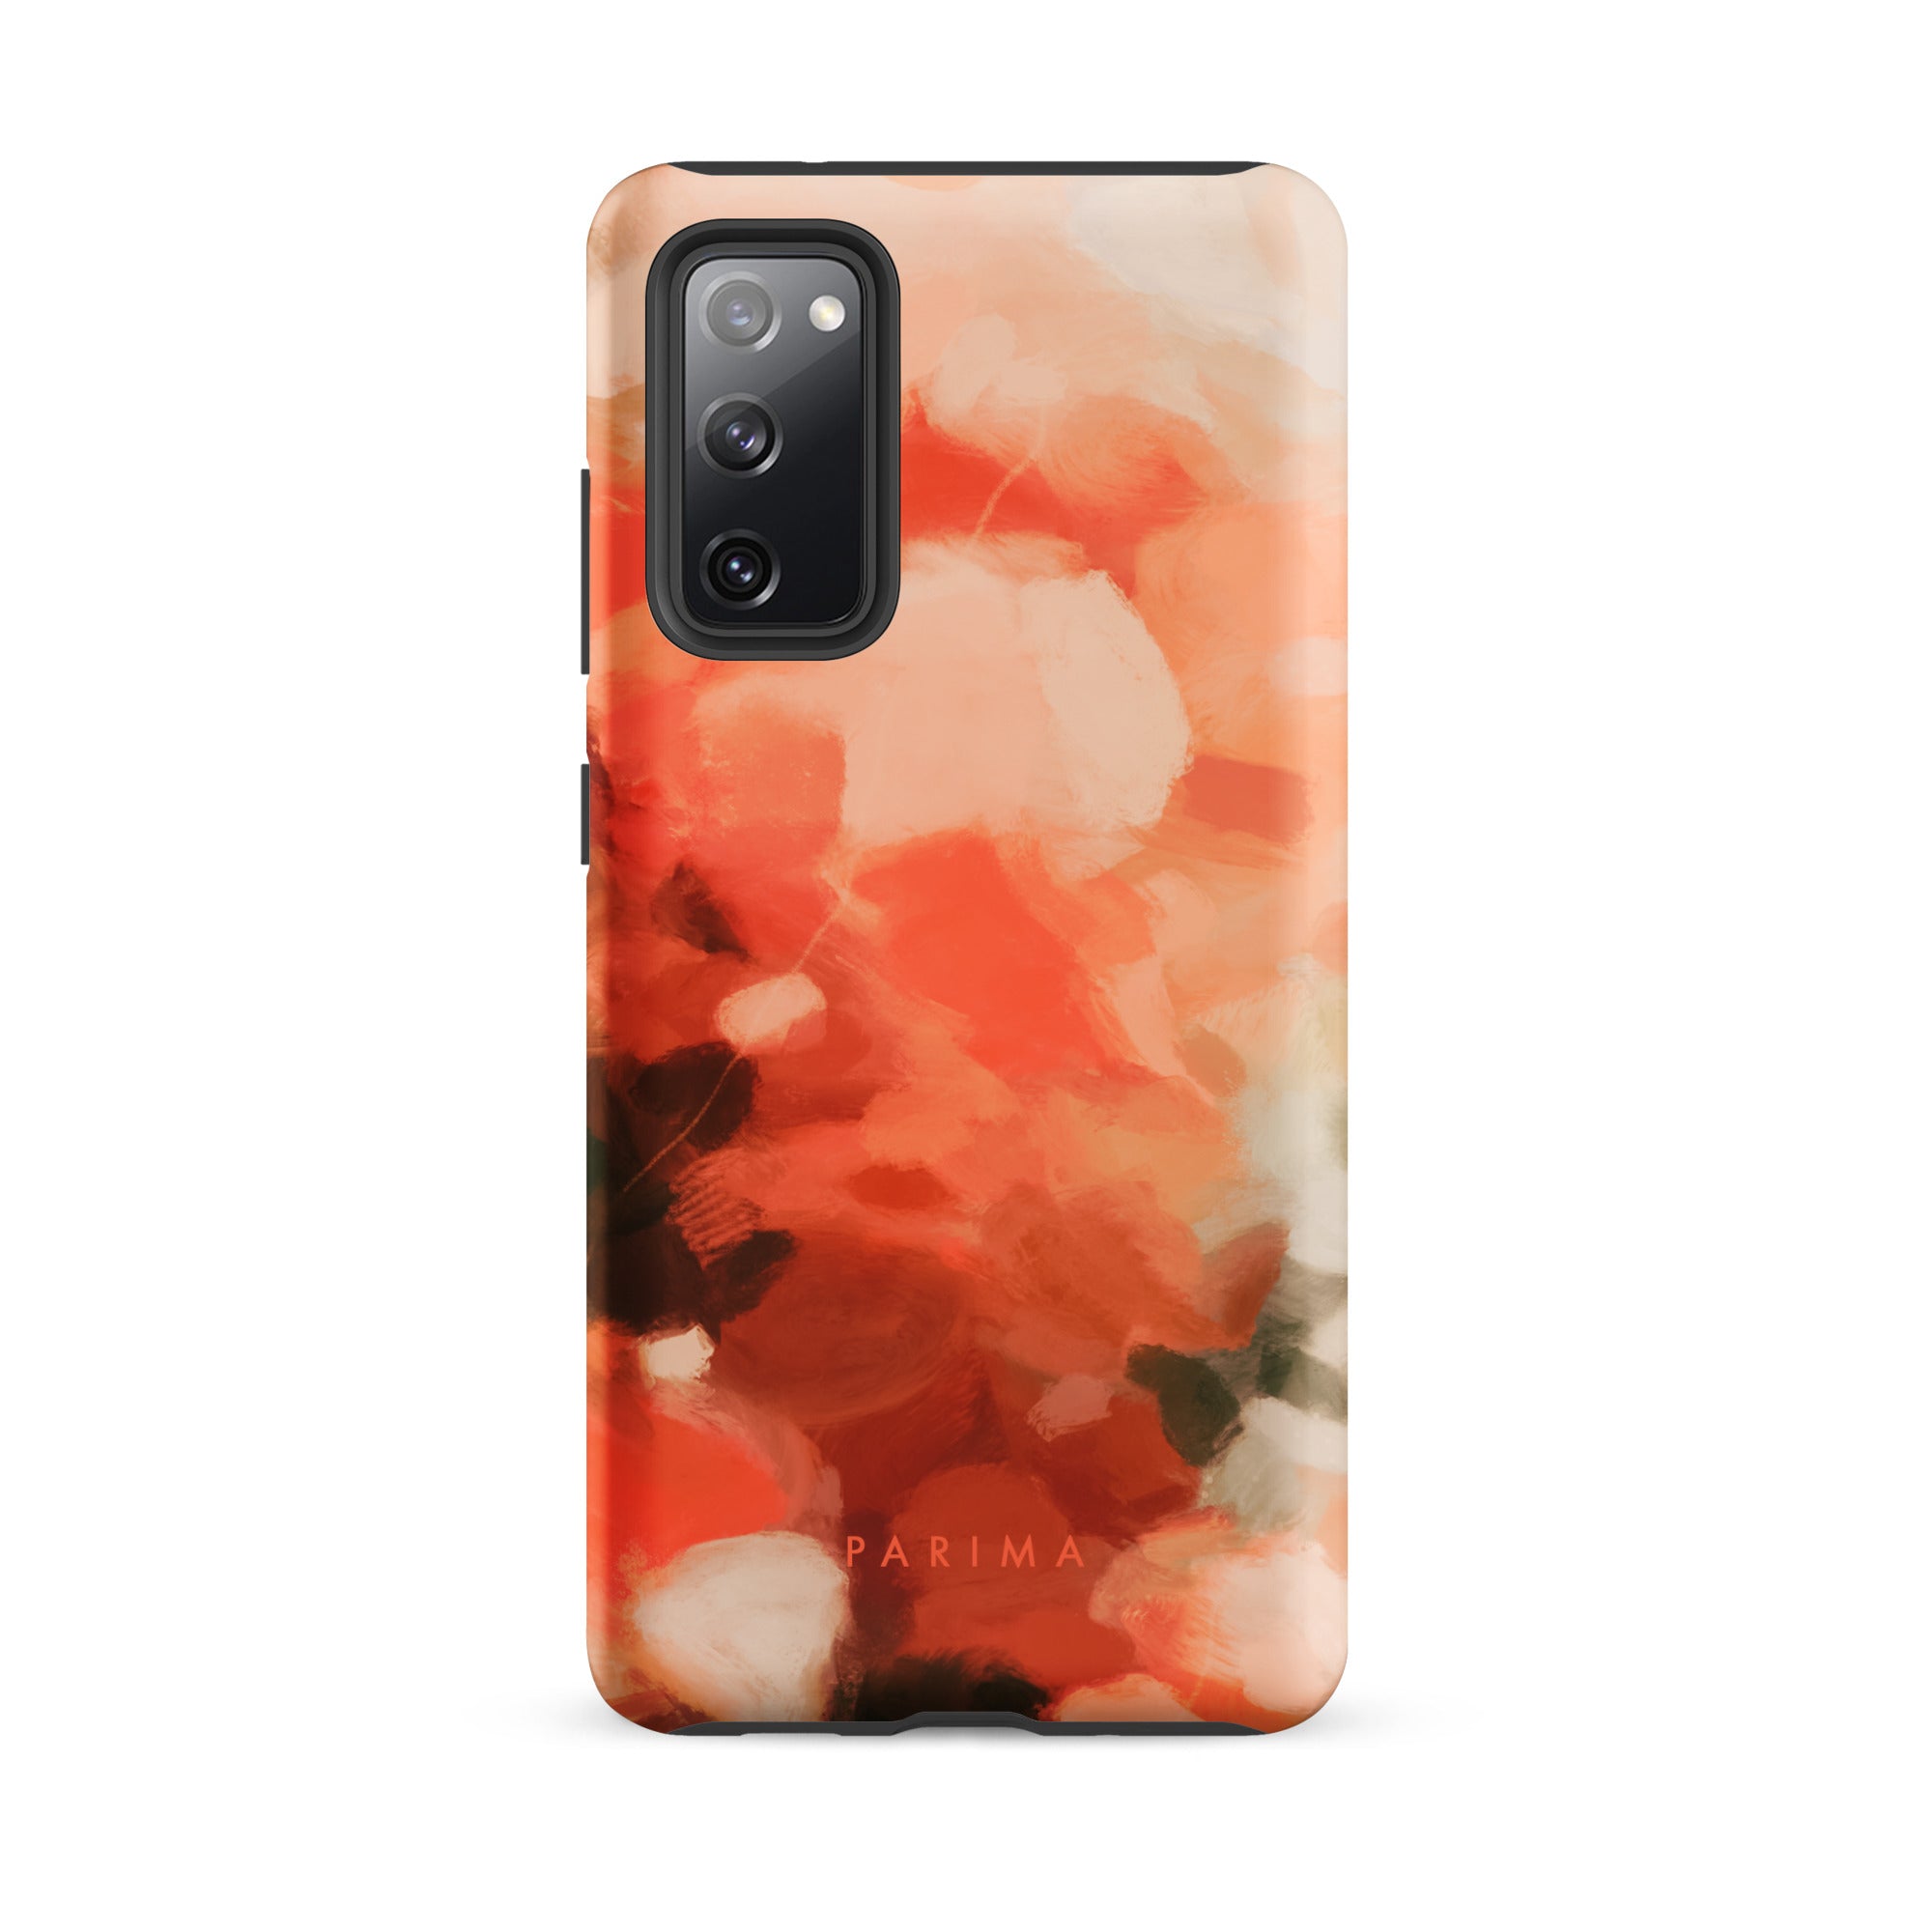 Sweet Nectar, orange and pink abstract art on Samsung Galaxy S20 FE tough case by Parima Studio